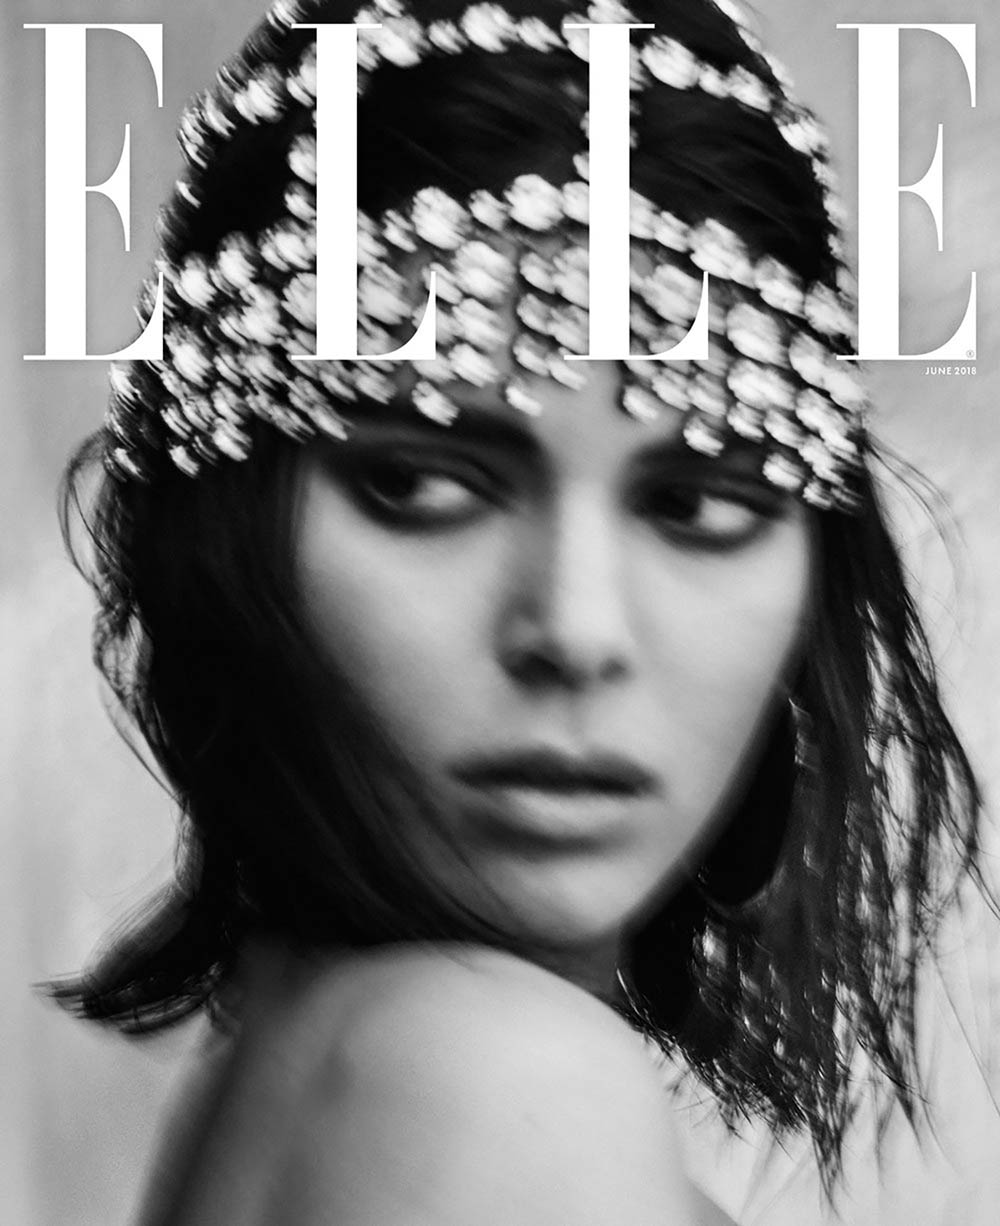 Kendall Jenner covers Elle US June 2018 by Chris Colls